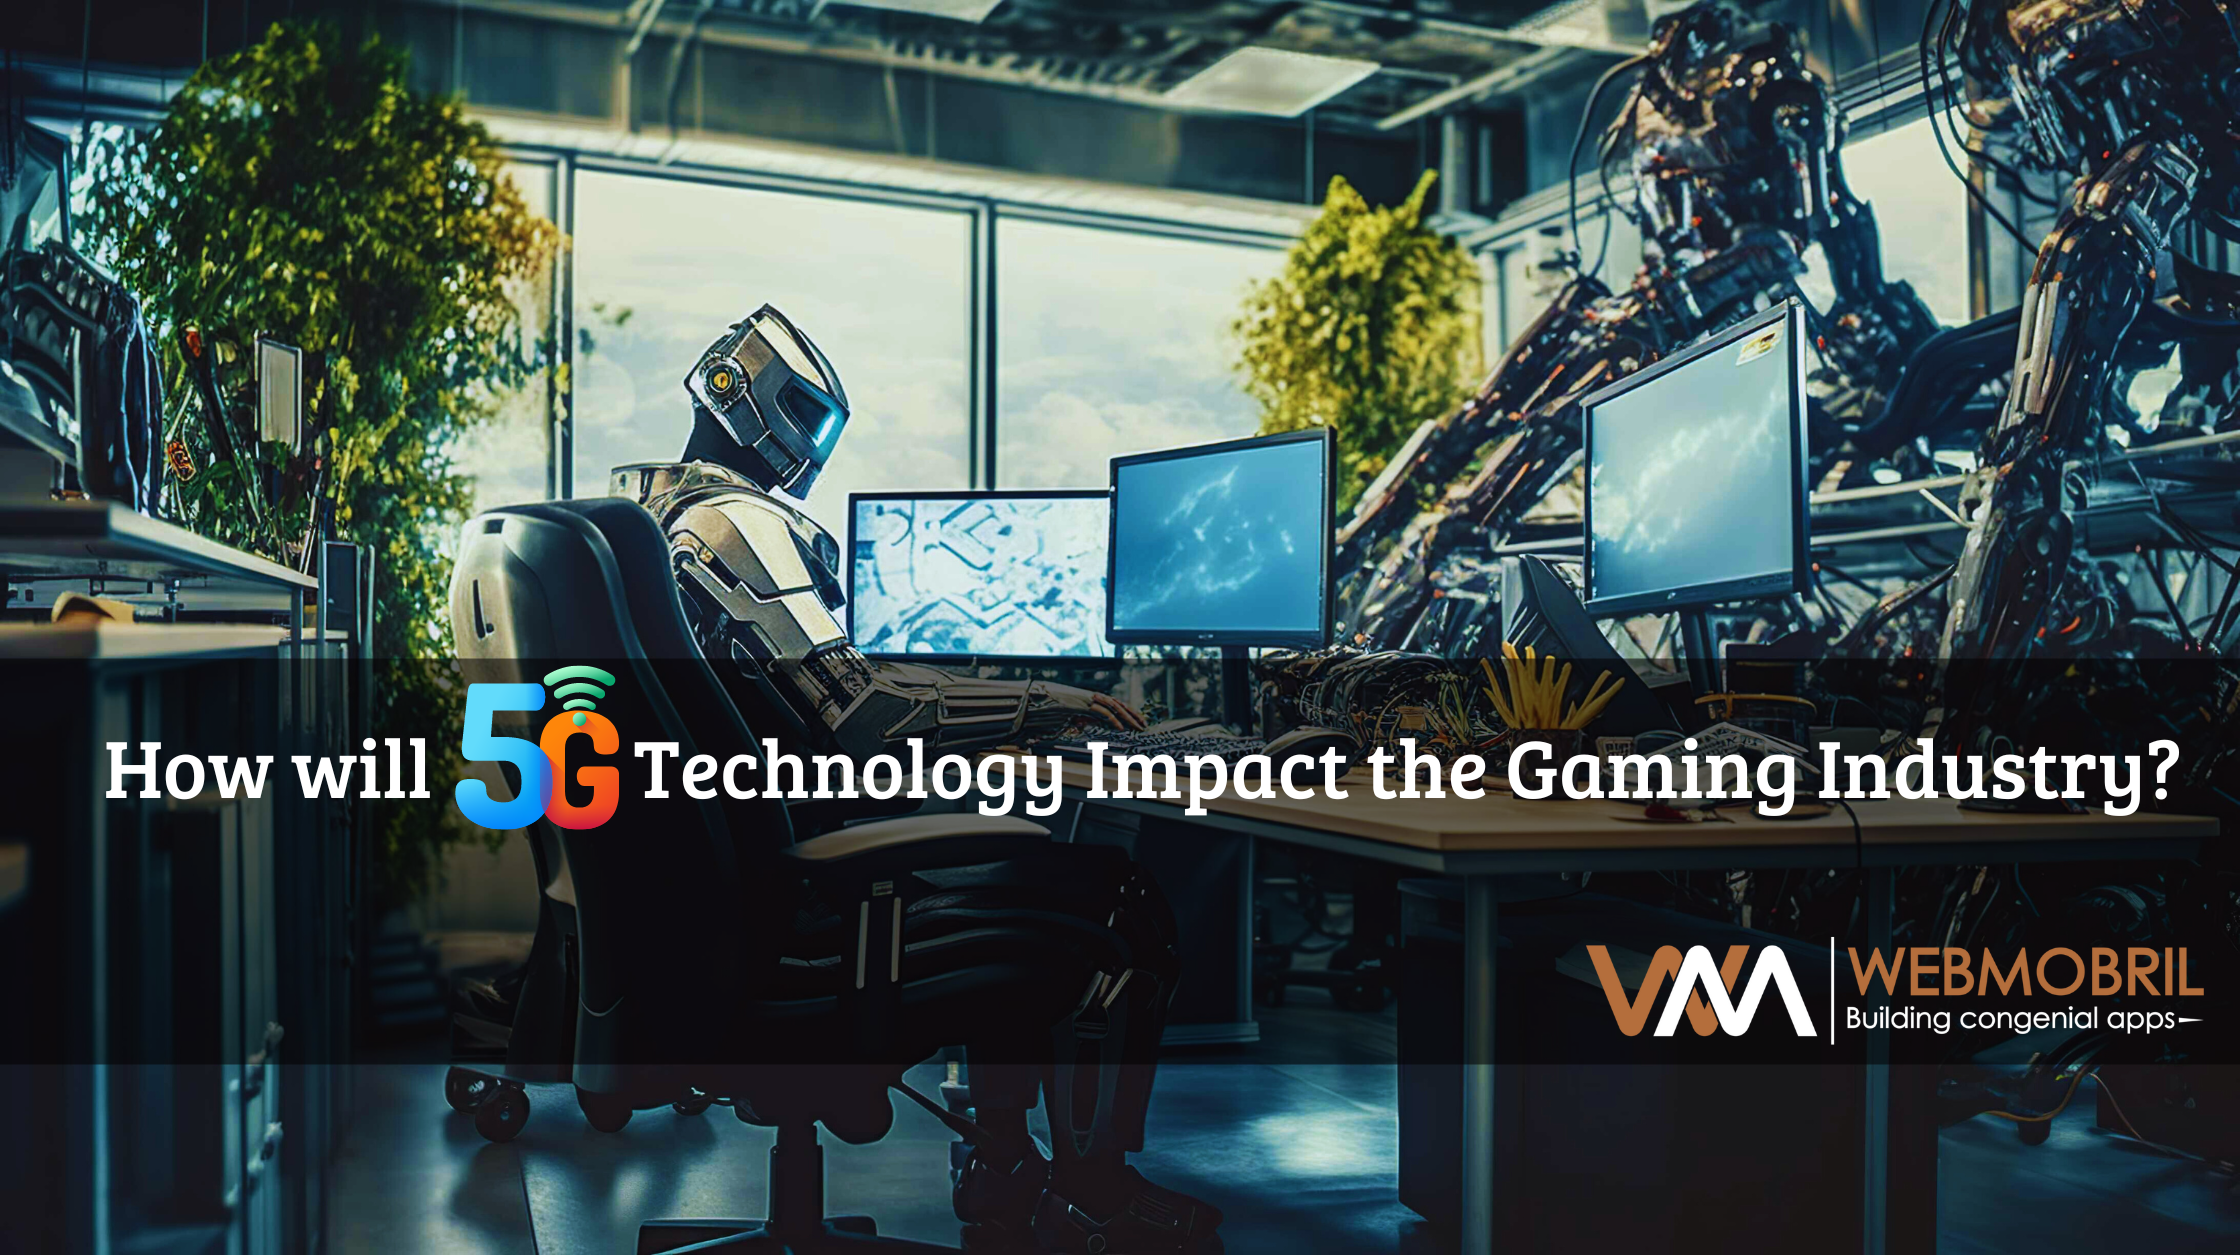 How will 5G Technology Impact the Gaming Industry?